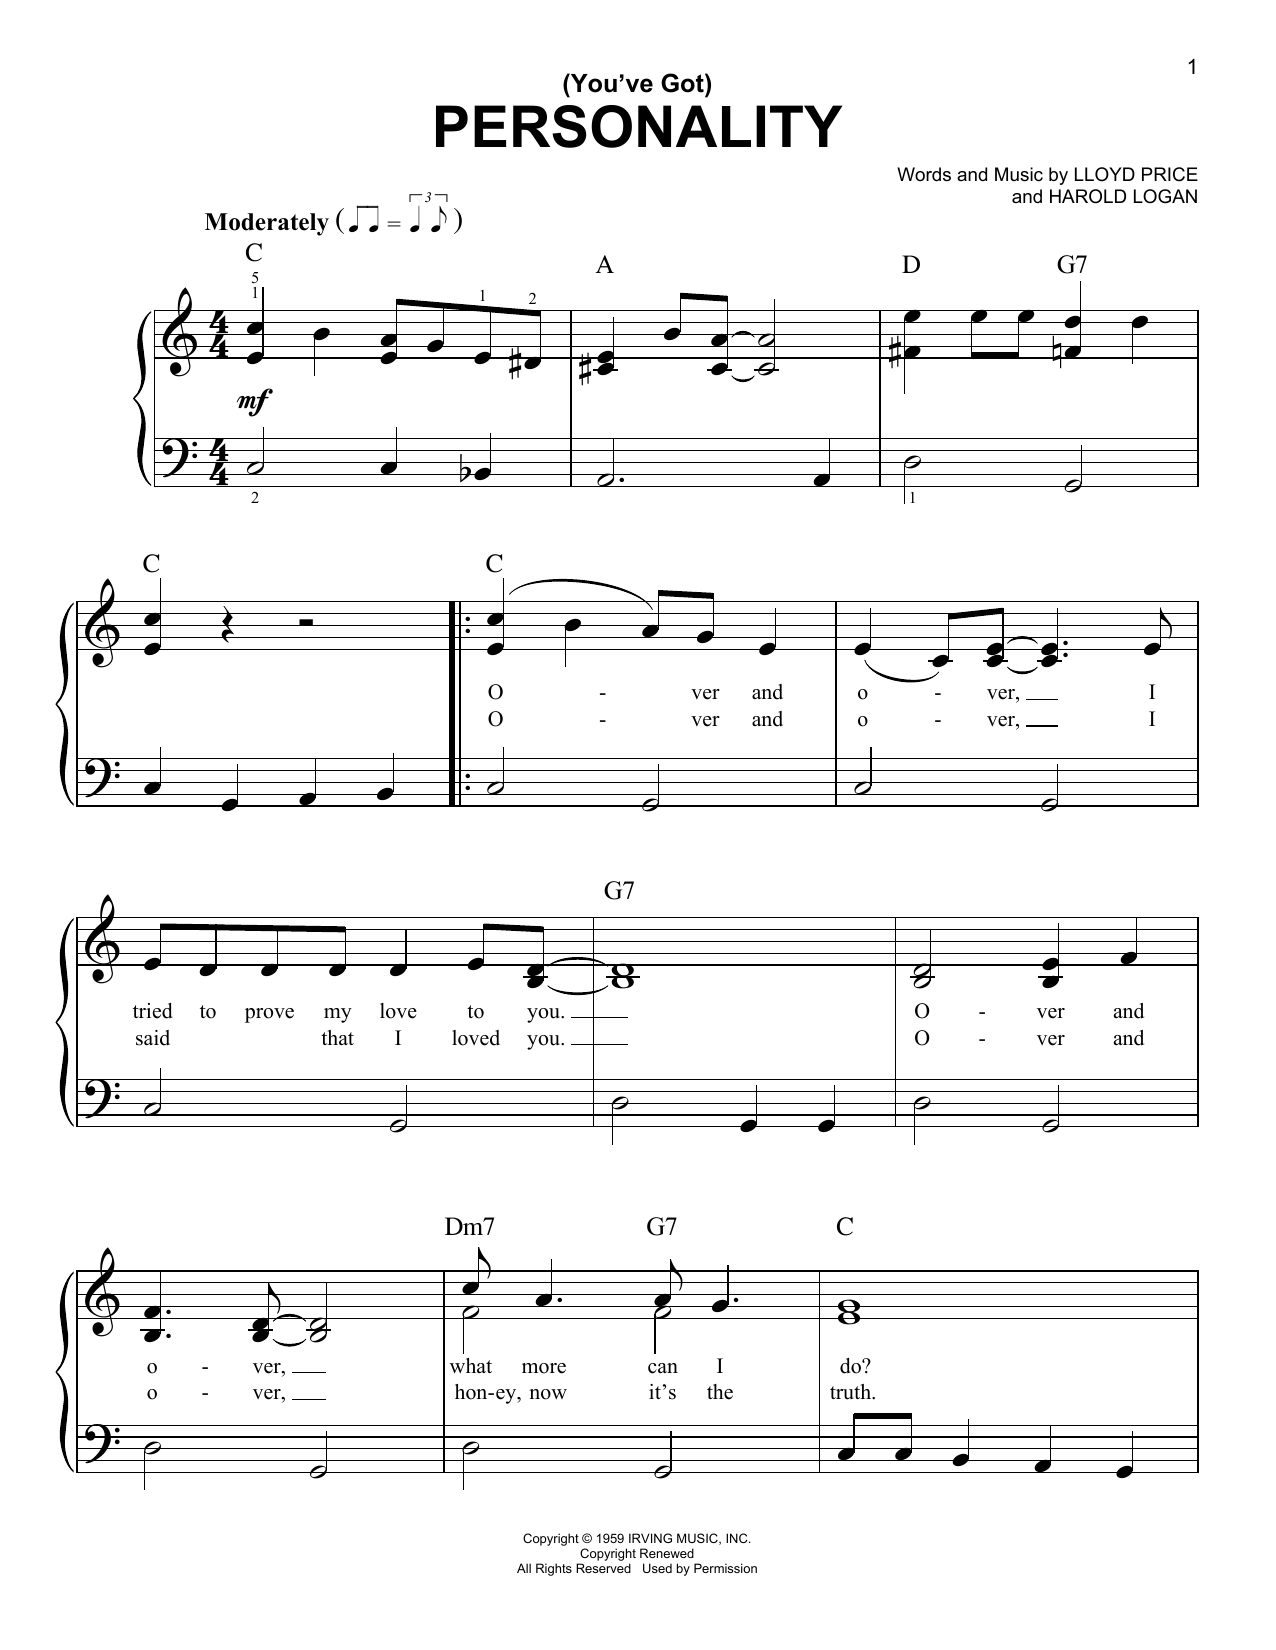 Lloyd Price (You've Got) Personality sheet music notes and chords. Download Printable PDF.